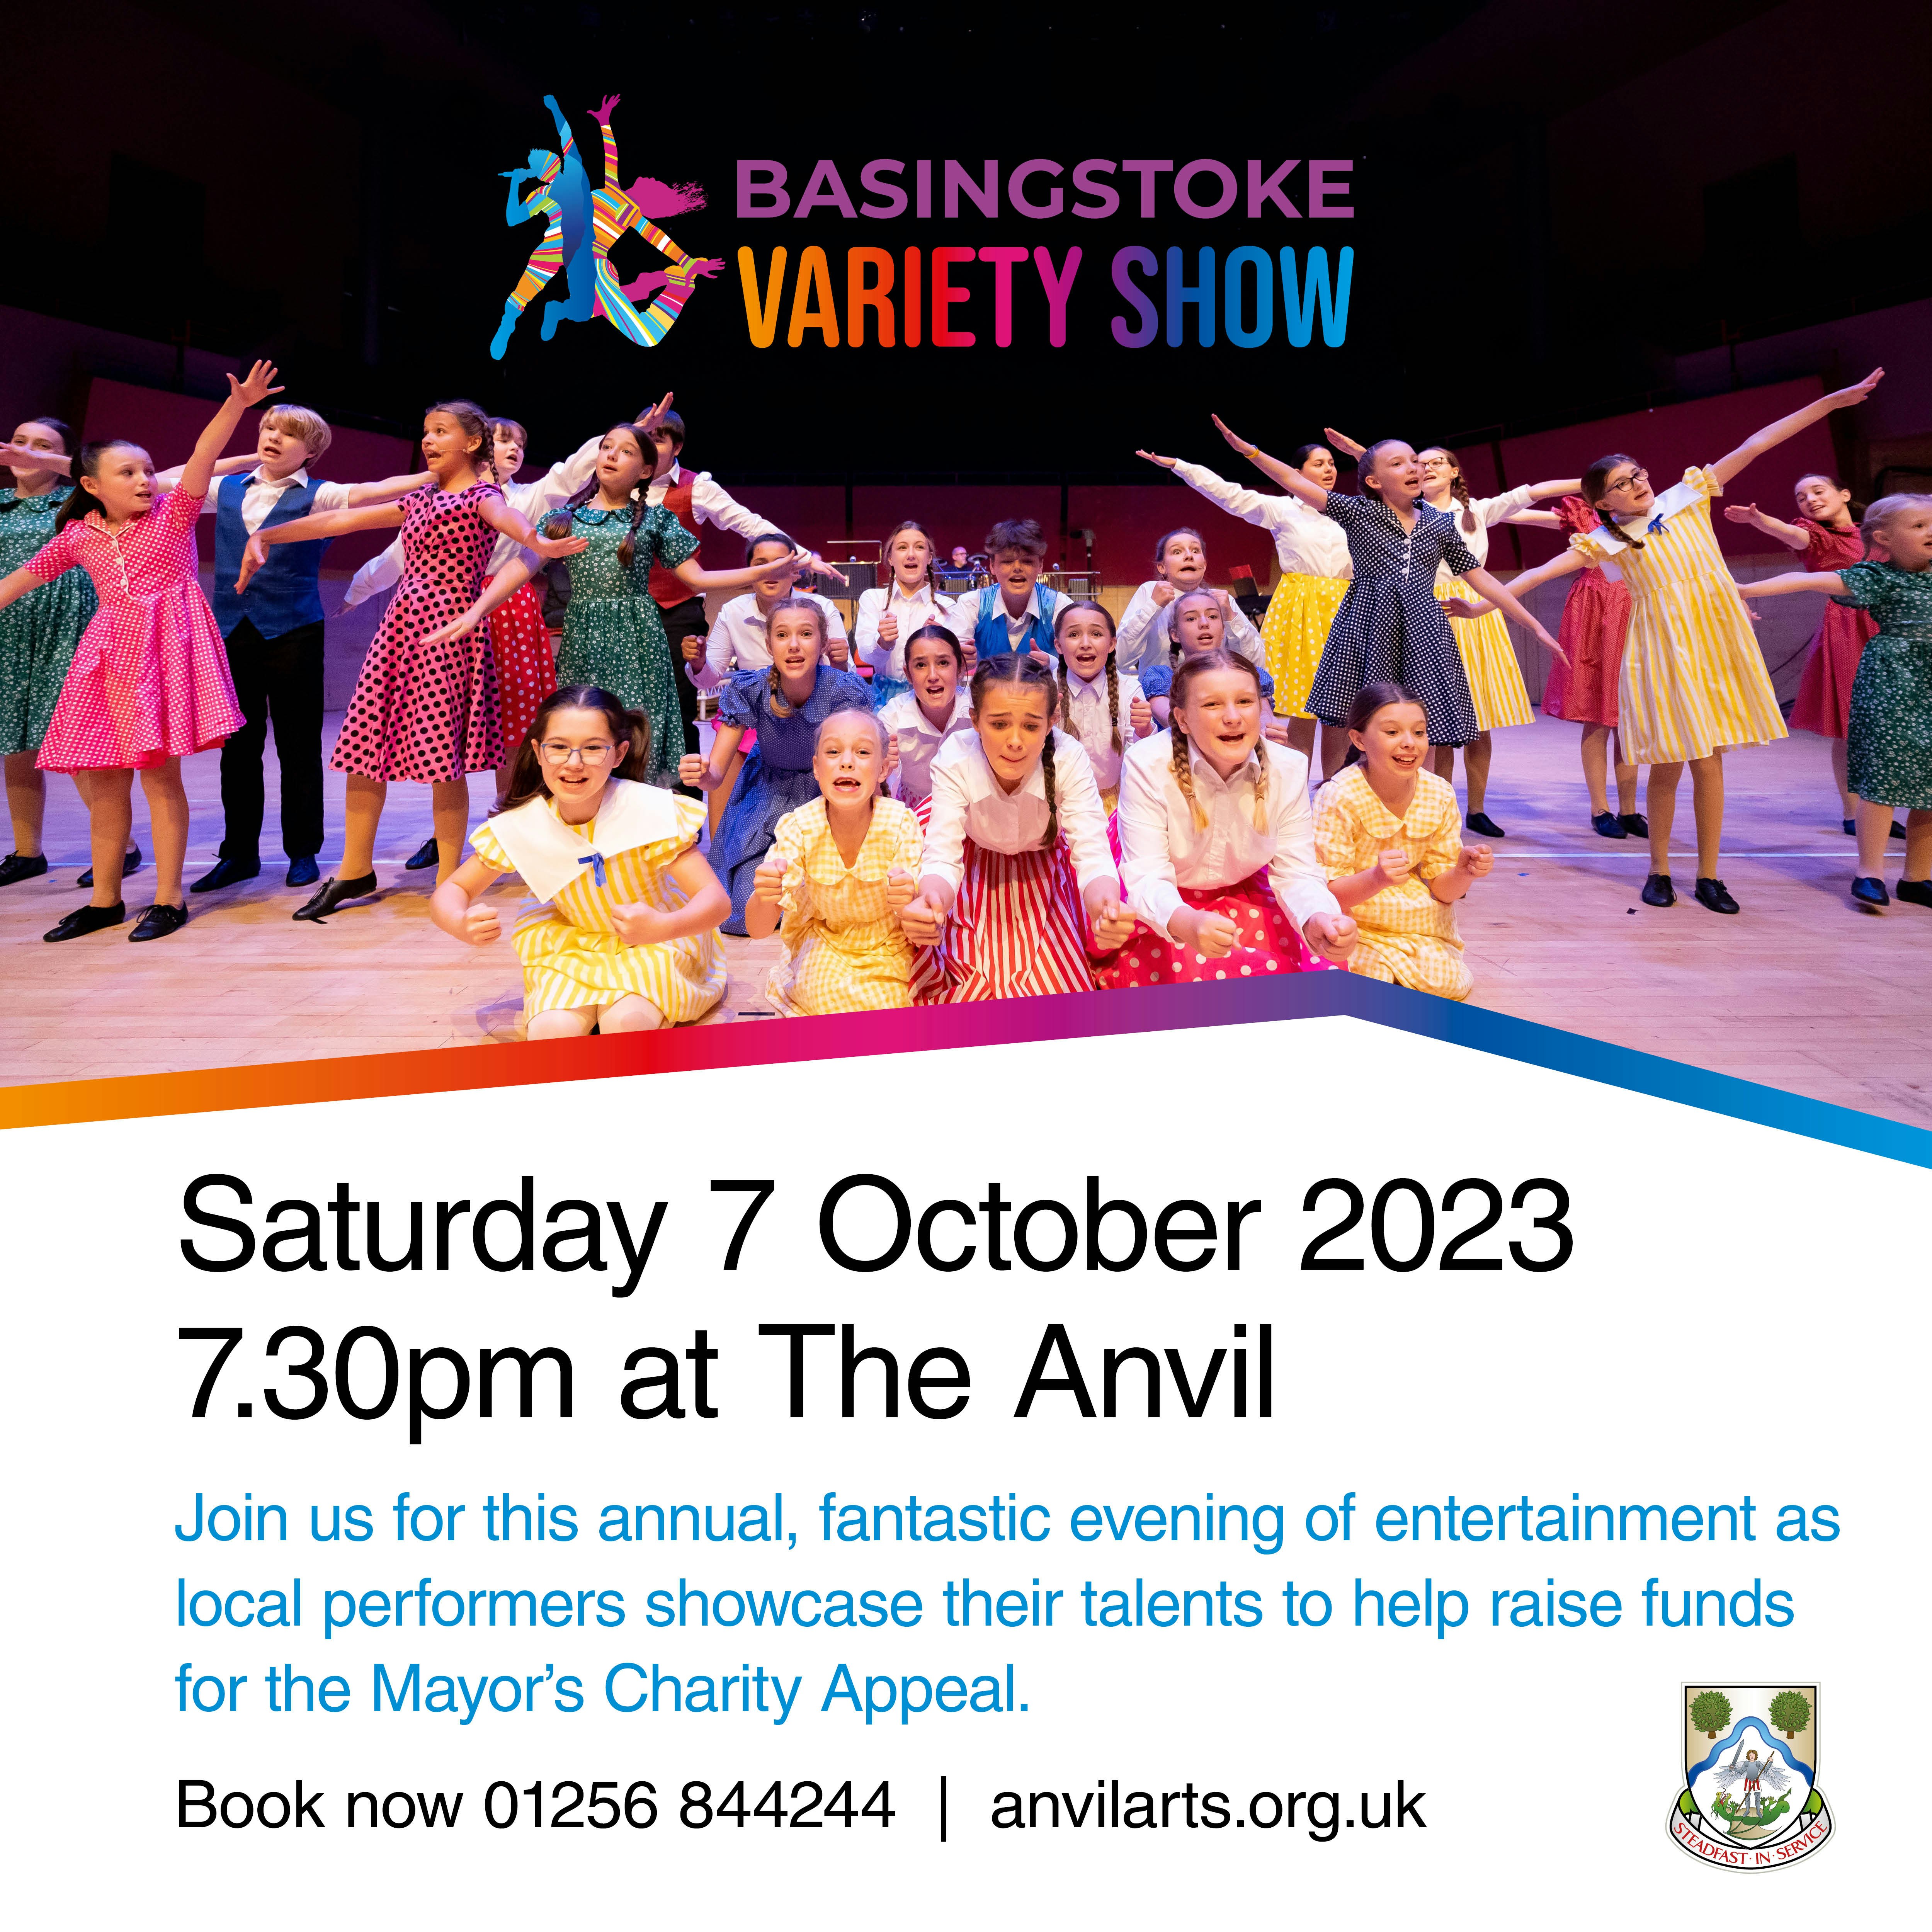 A social card promoting a variety show on Saturday 7 October 2023. The top half of the image shows children on a stage. The bottom half is plain white with the text.